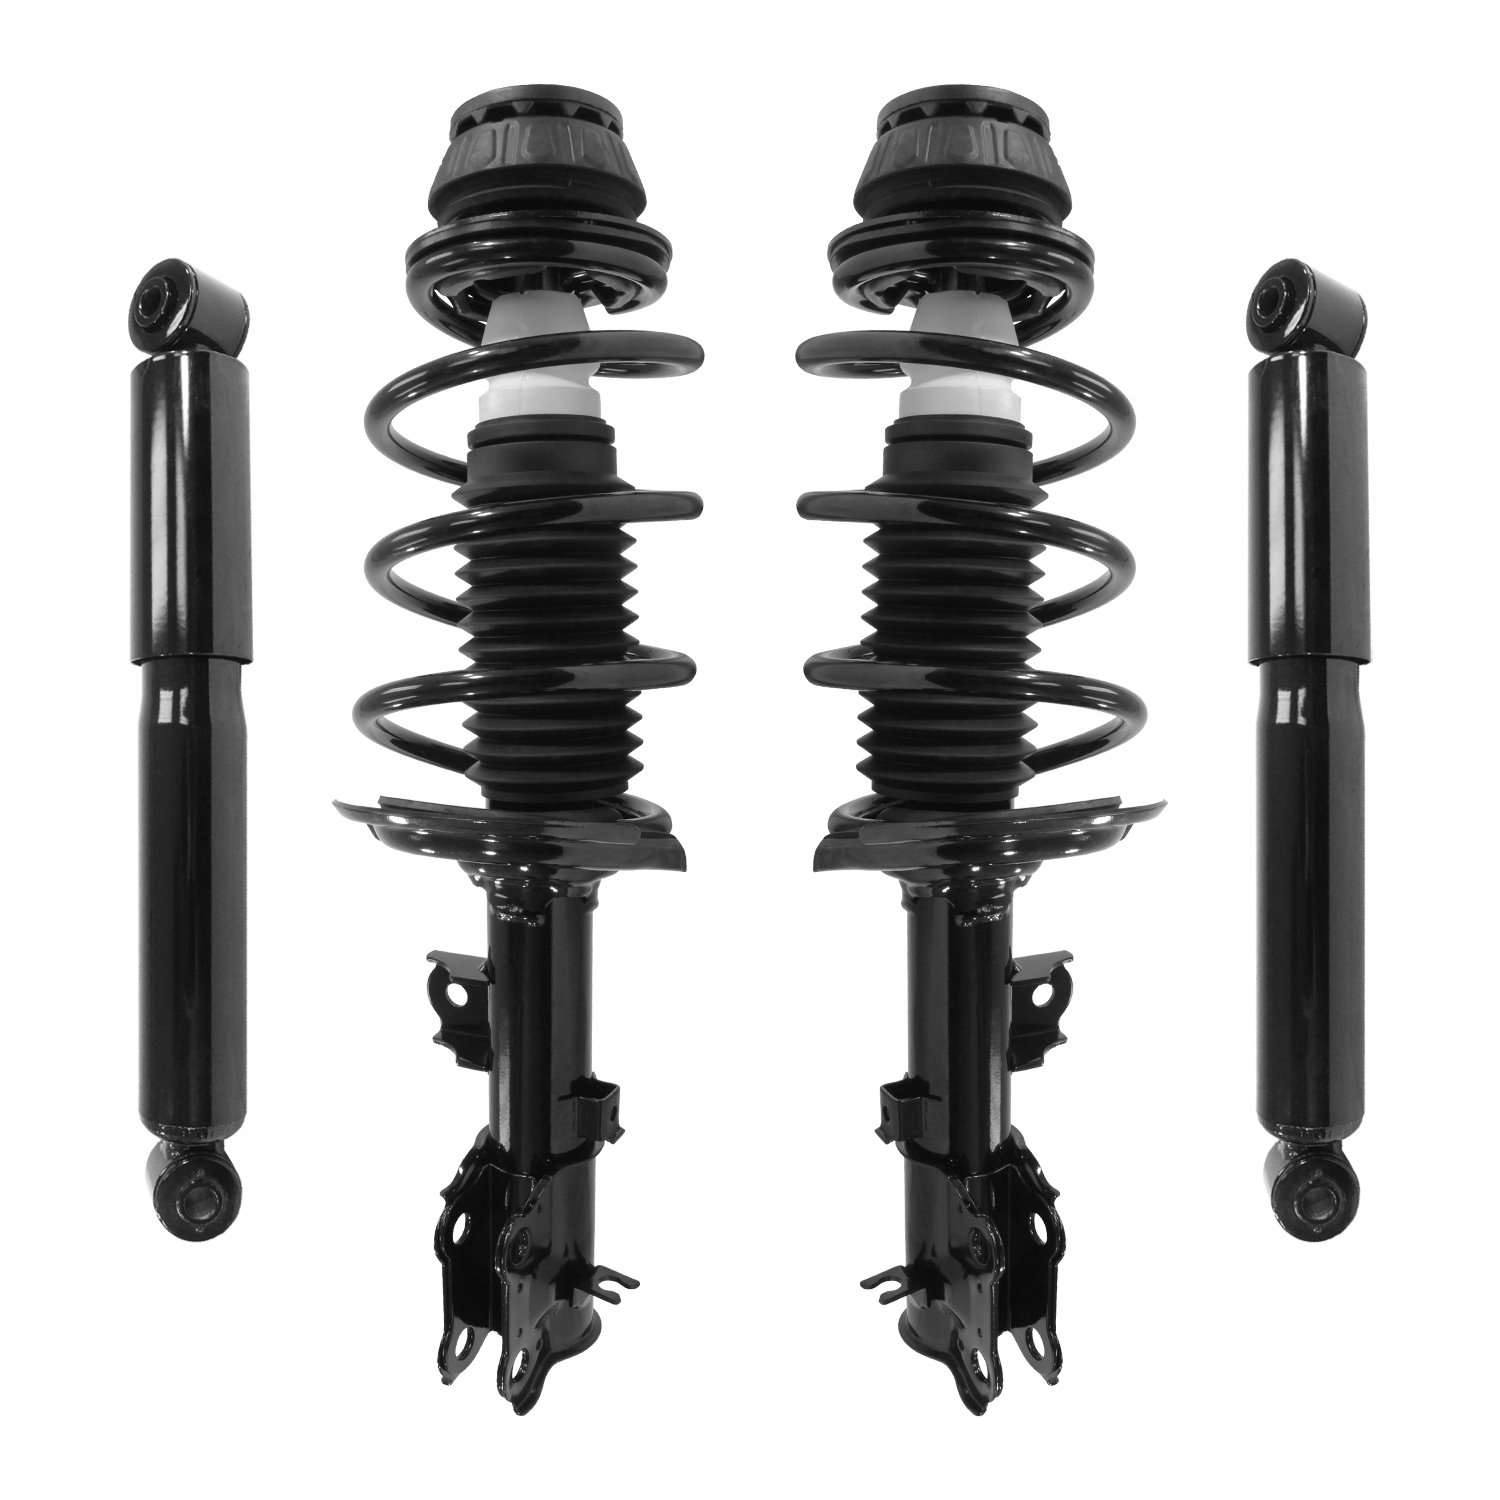 4-11185-259970-001 Front & Rear Suspension Strut & Coil Spring Assembly Fits Select Hyundai Accent